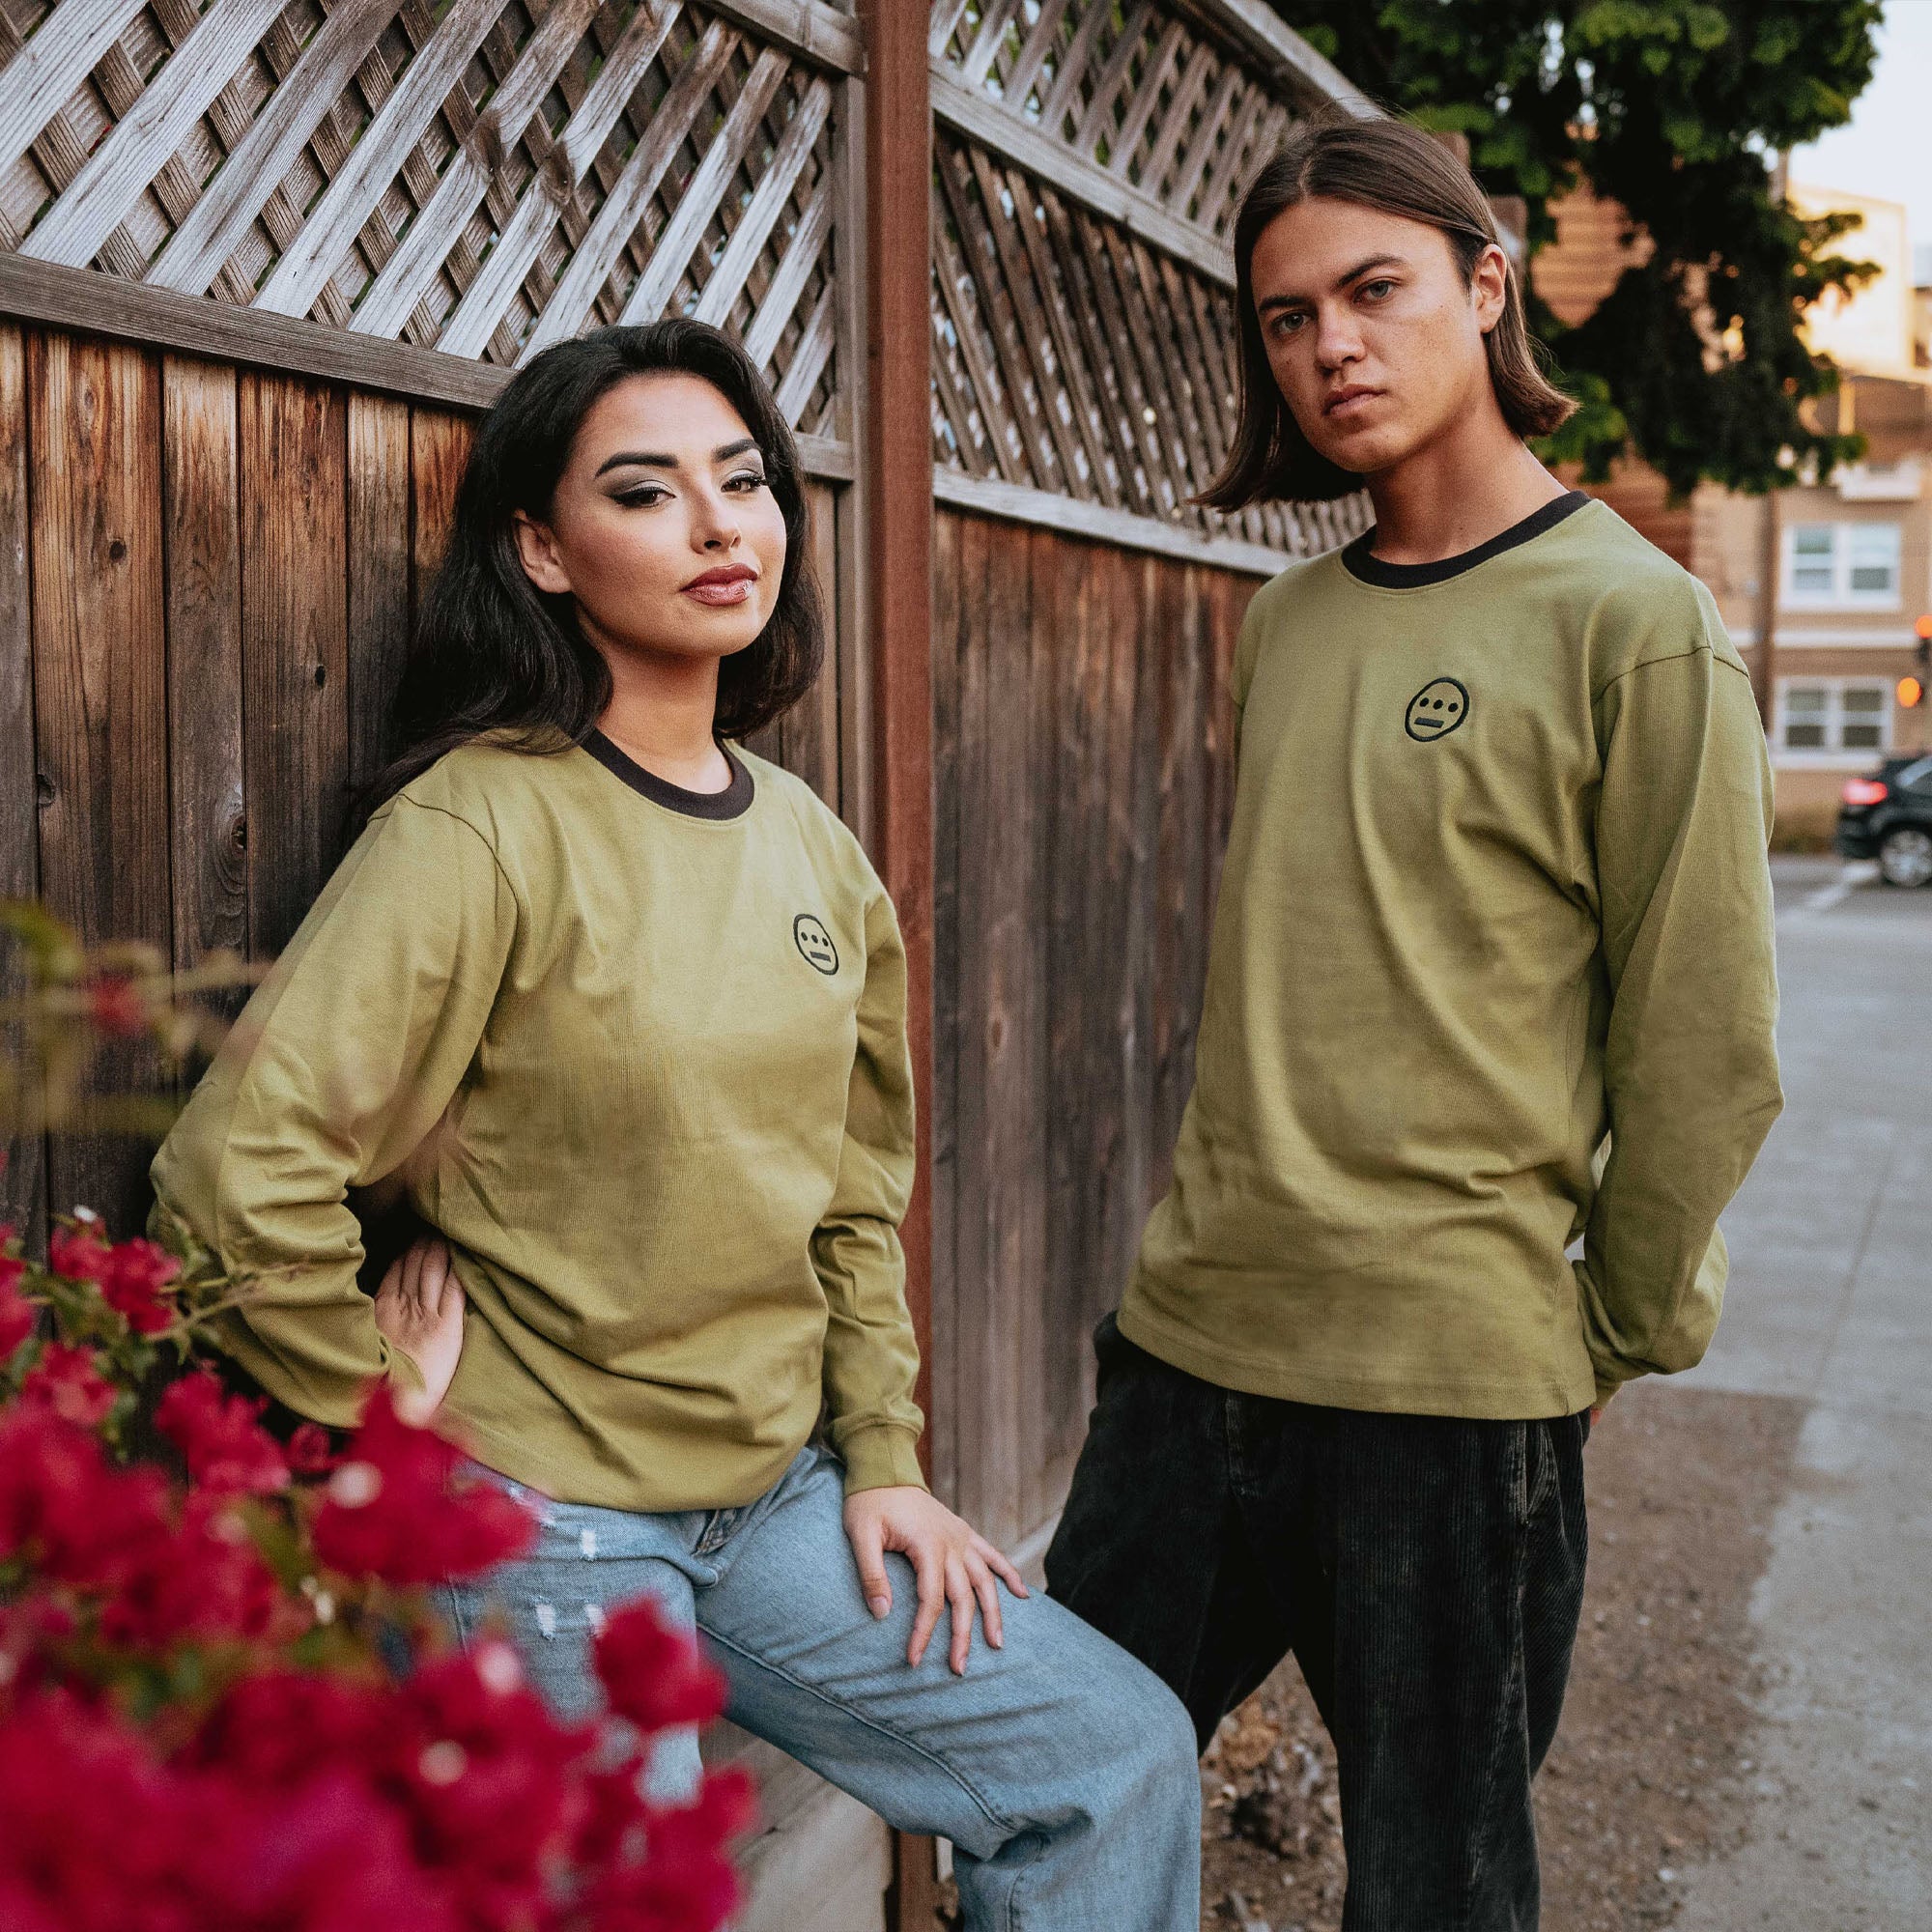 Army green long sleeve crew neck tee with black Hiero hip-hop logo on chest on man and a woman outdoors.